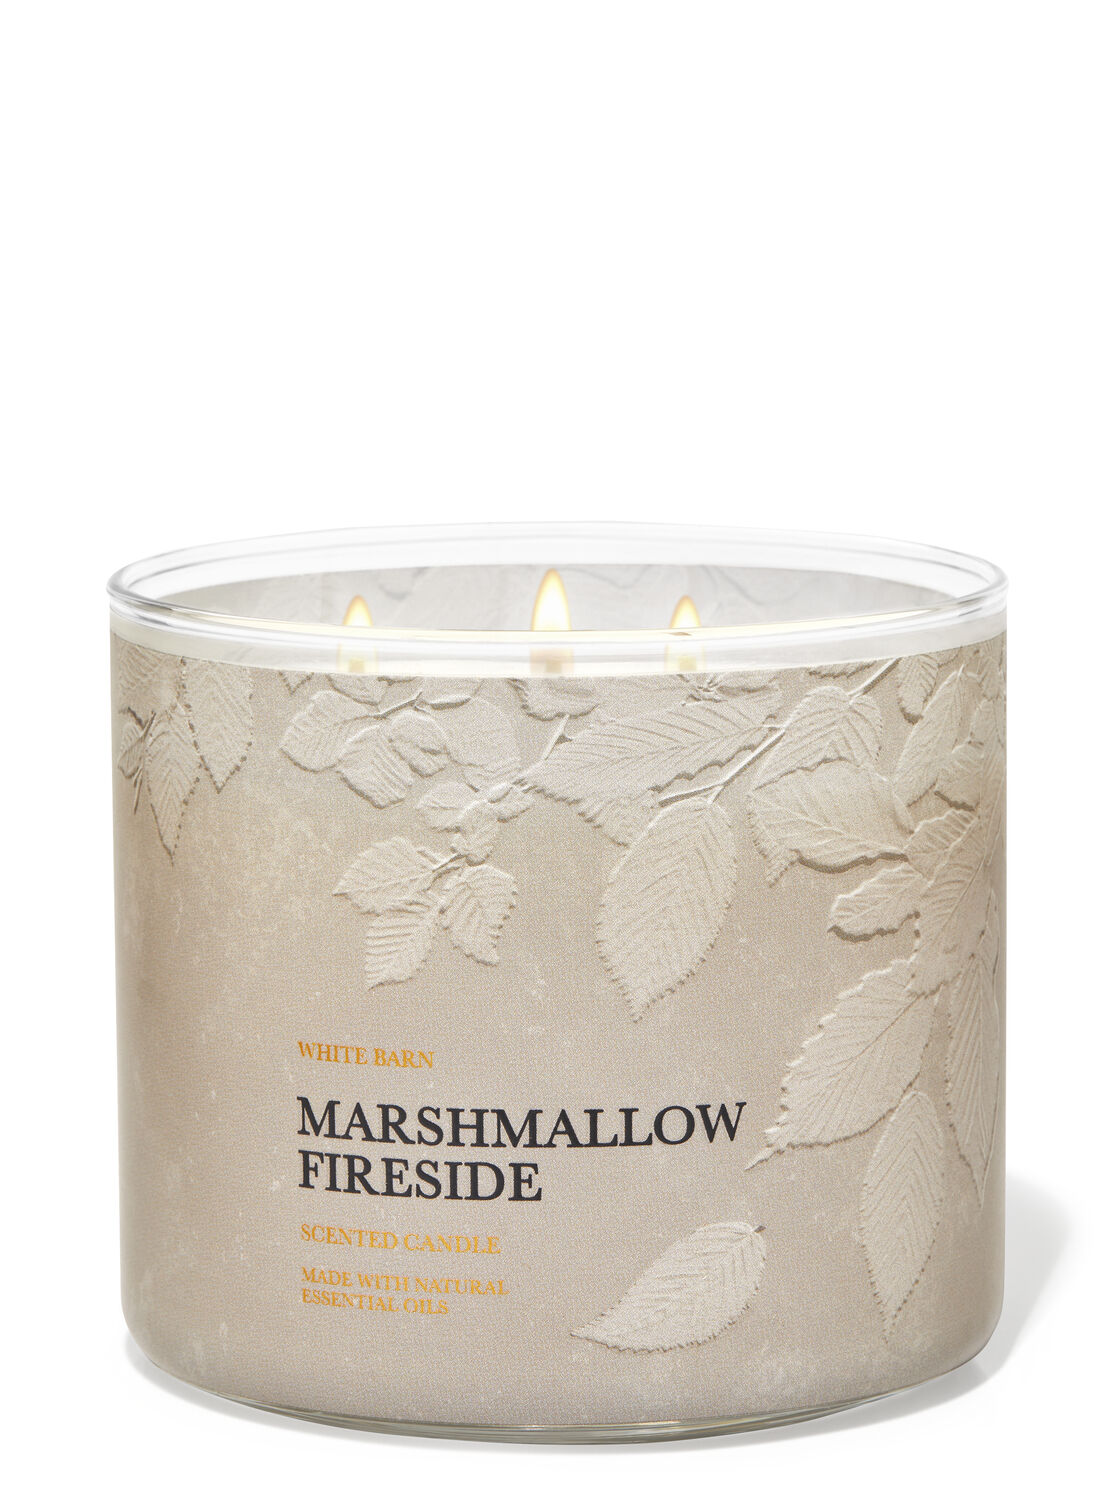 1 Bath & Body Works Marshmallow Fireside Scented 3 WICK Candle 14.5 oz NEW 